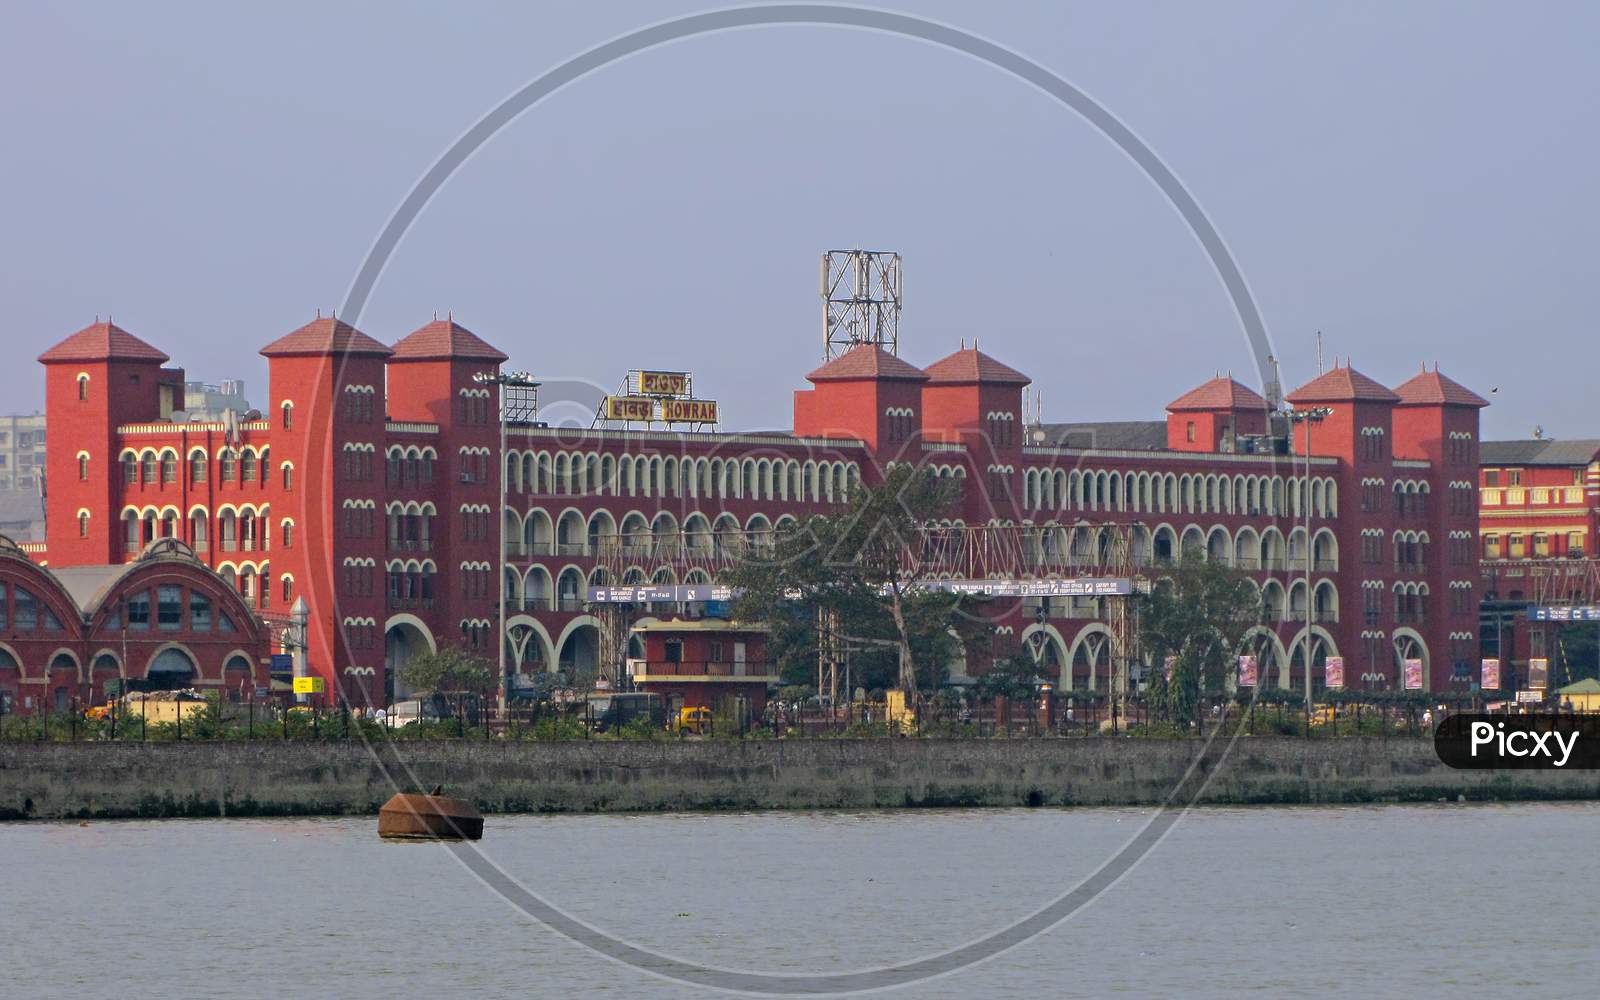 View Of Historical Howrah Railway Station Building From Across The Hooghly River.